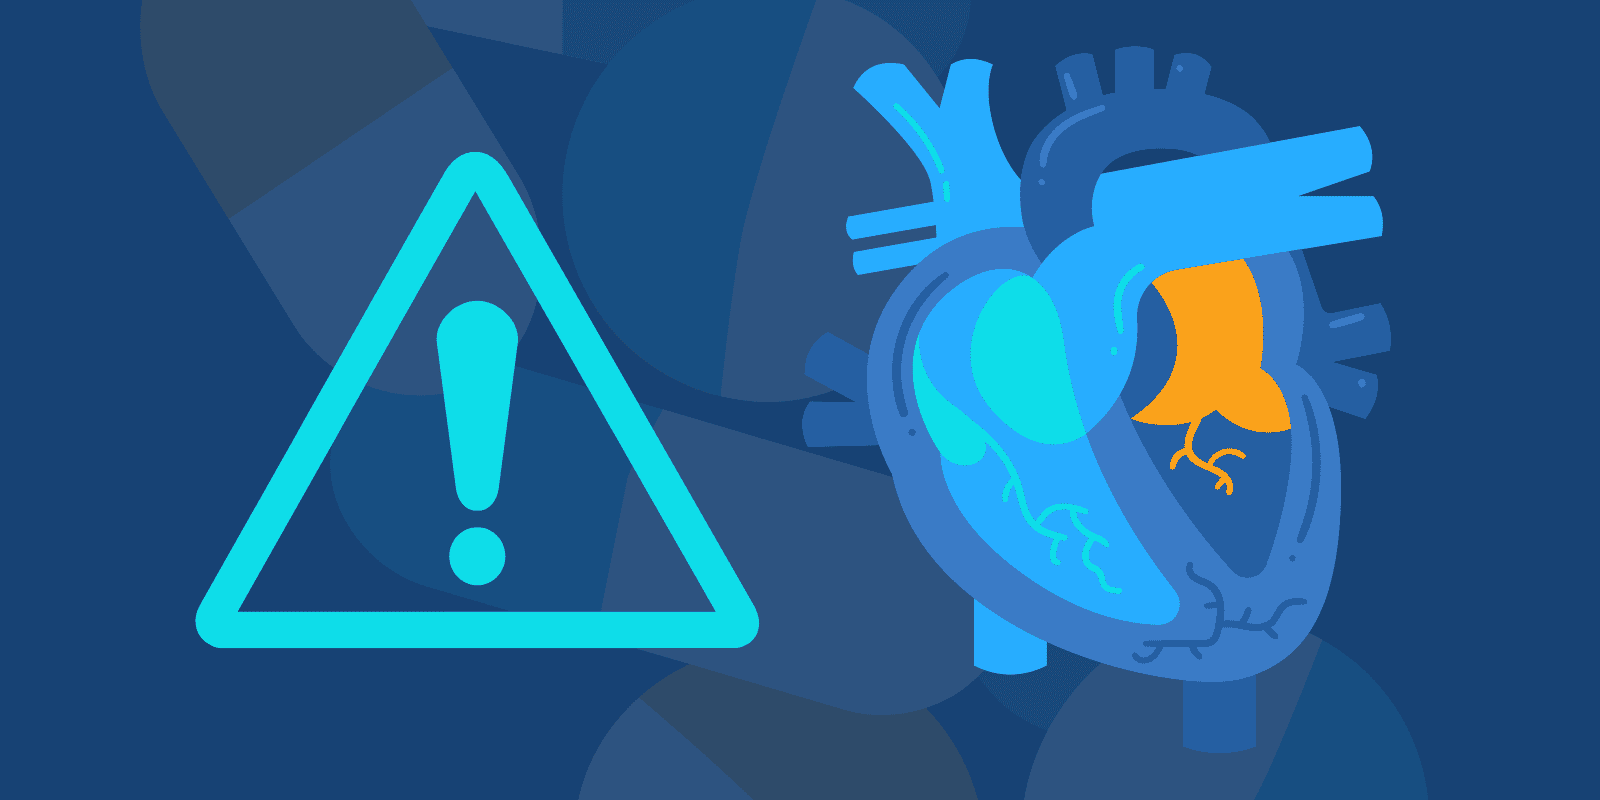 Heart illustration next to warning sign on top of a background with pills illustration